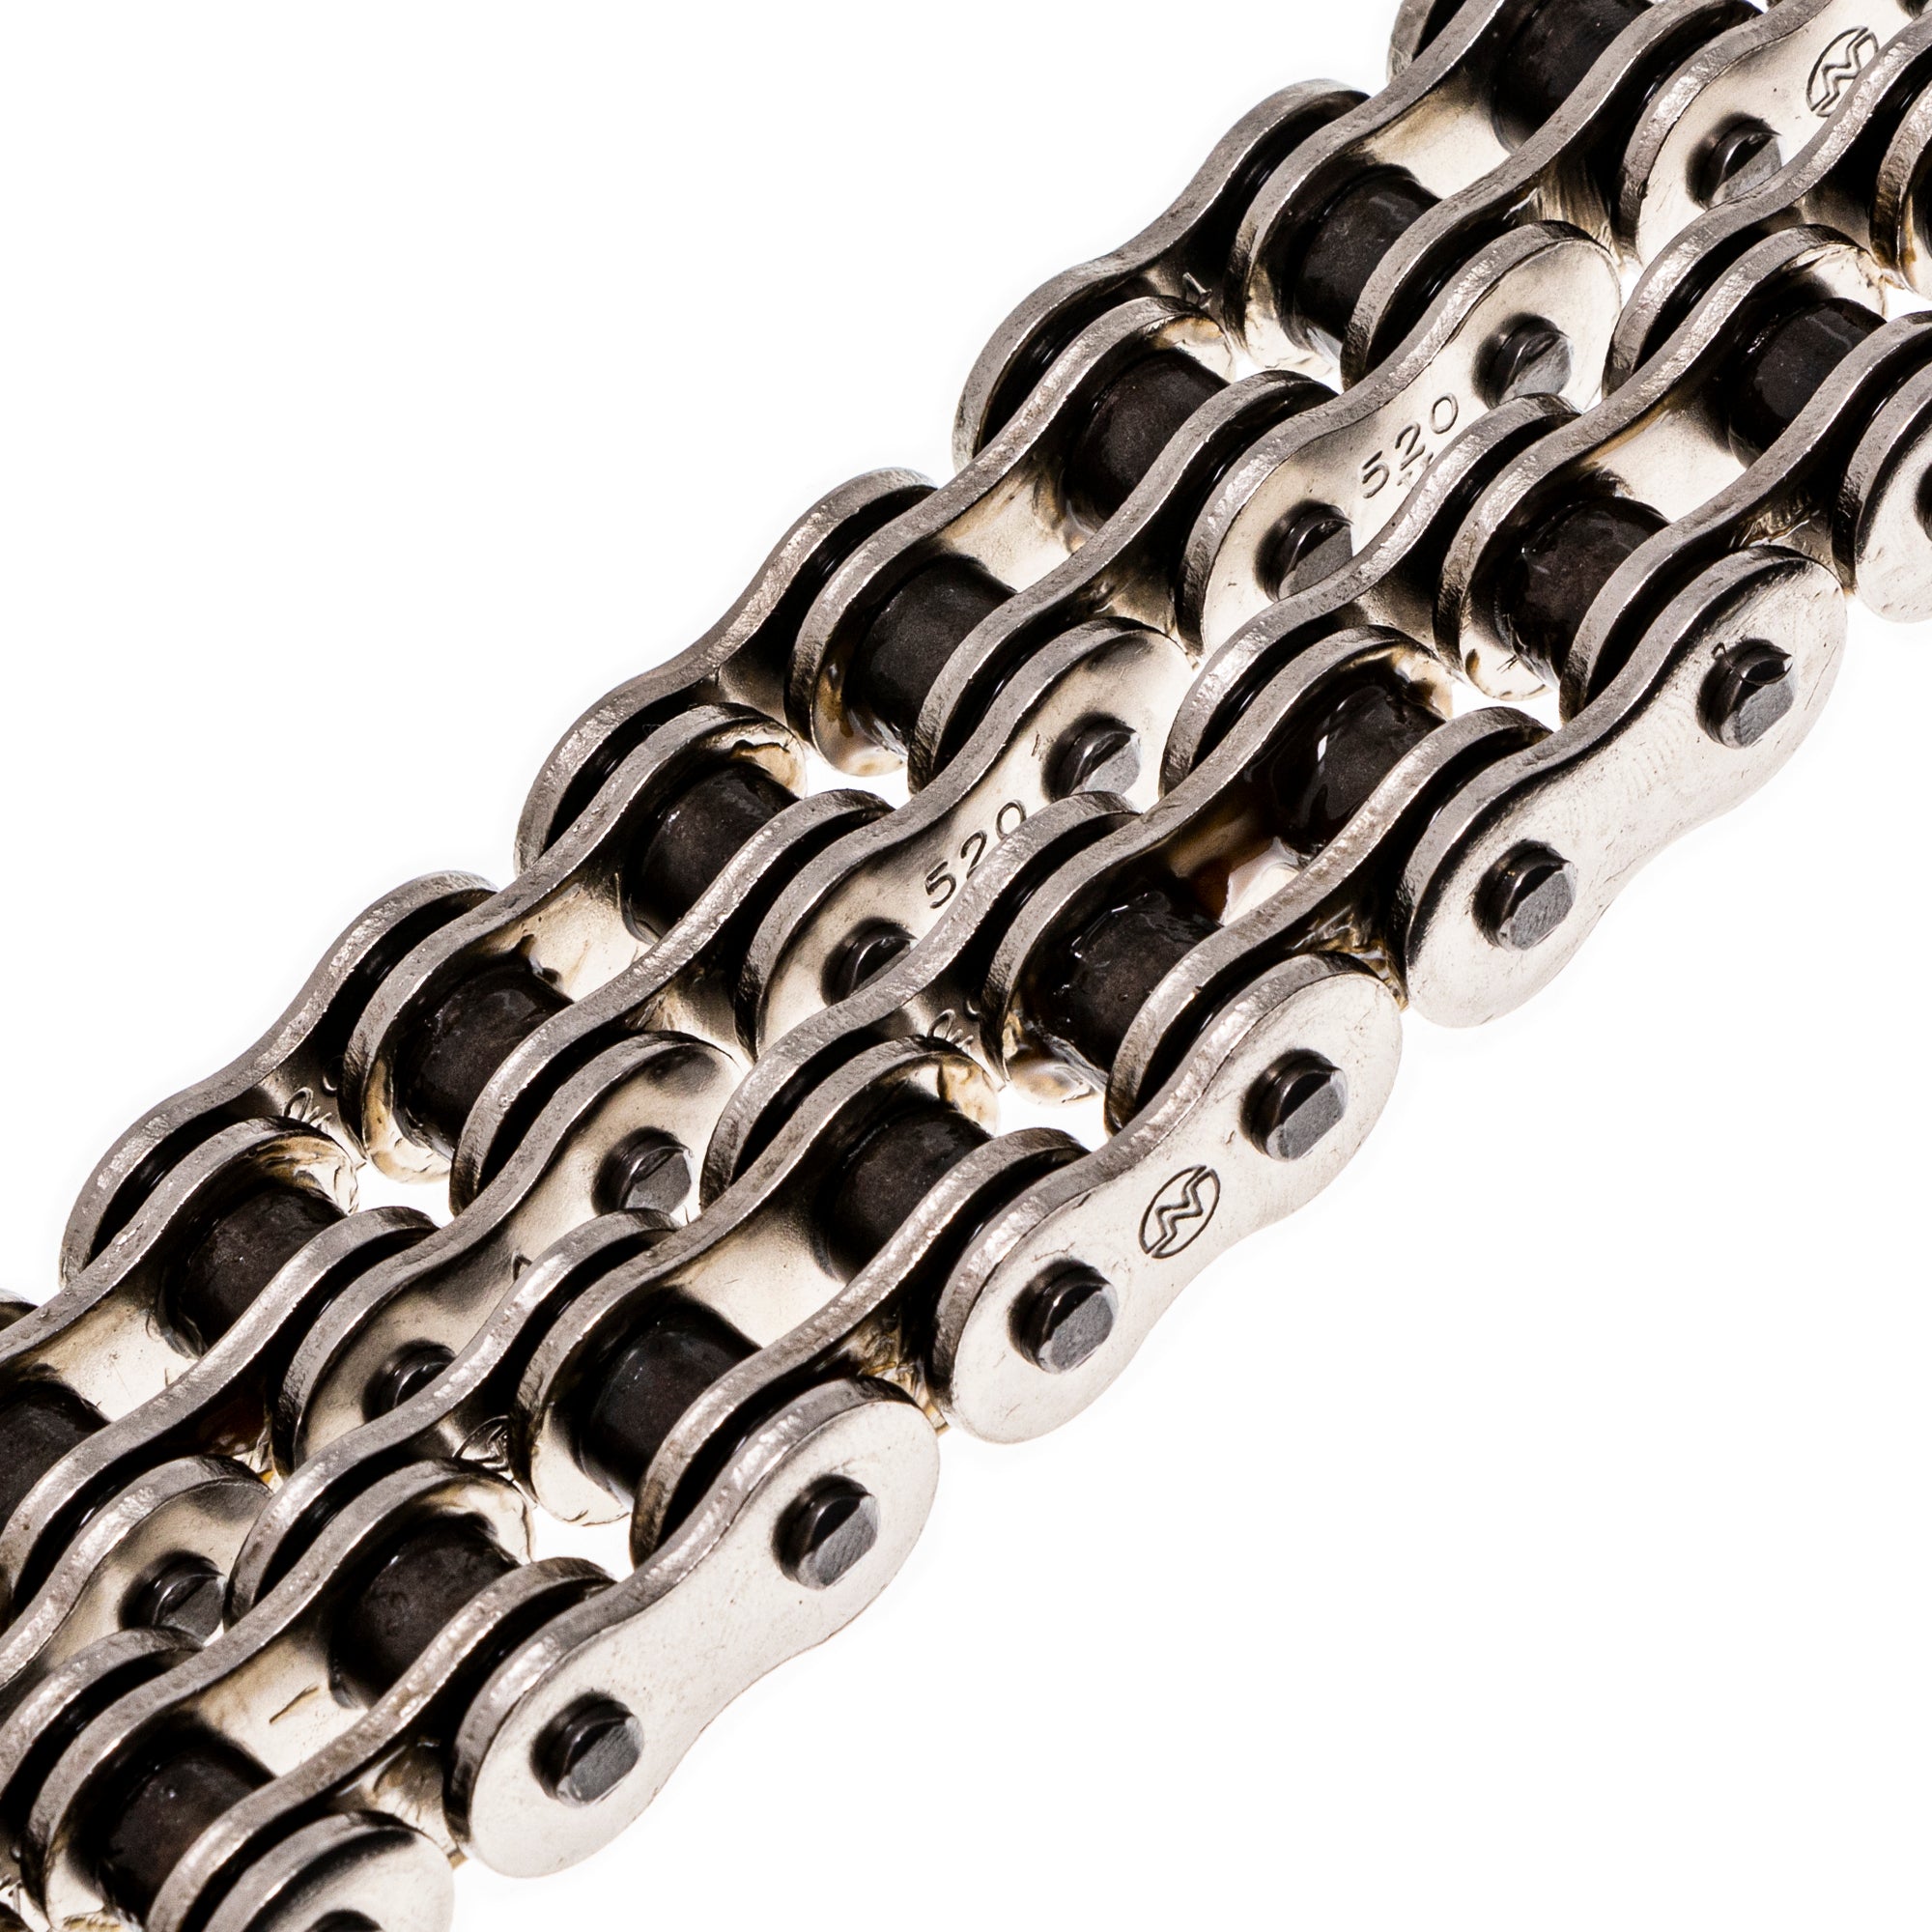 Drive Chain 74 Standard Non O-Ring w/ Master Link for zOTHER Yamaha Polaris Trail NICHE 519-CDC2201H